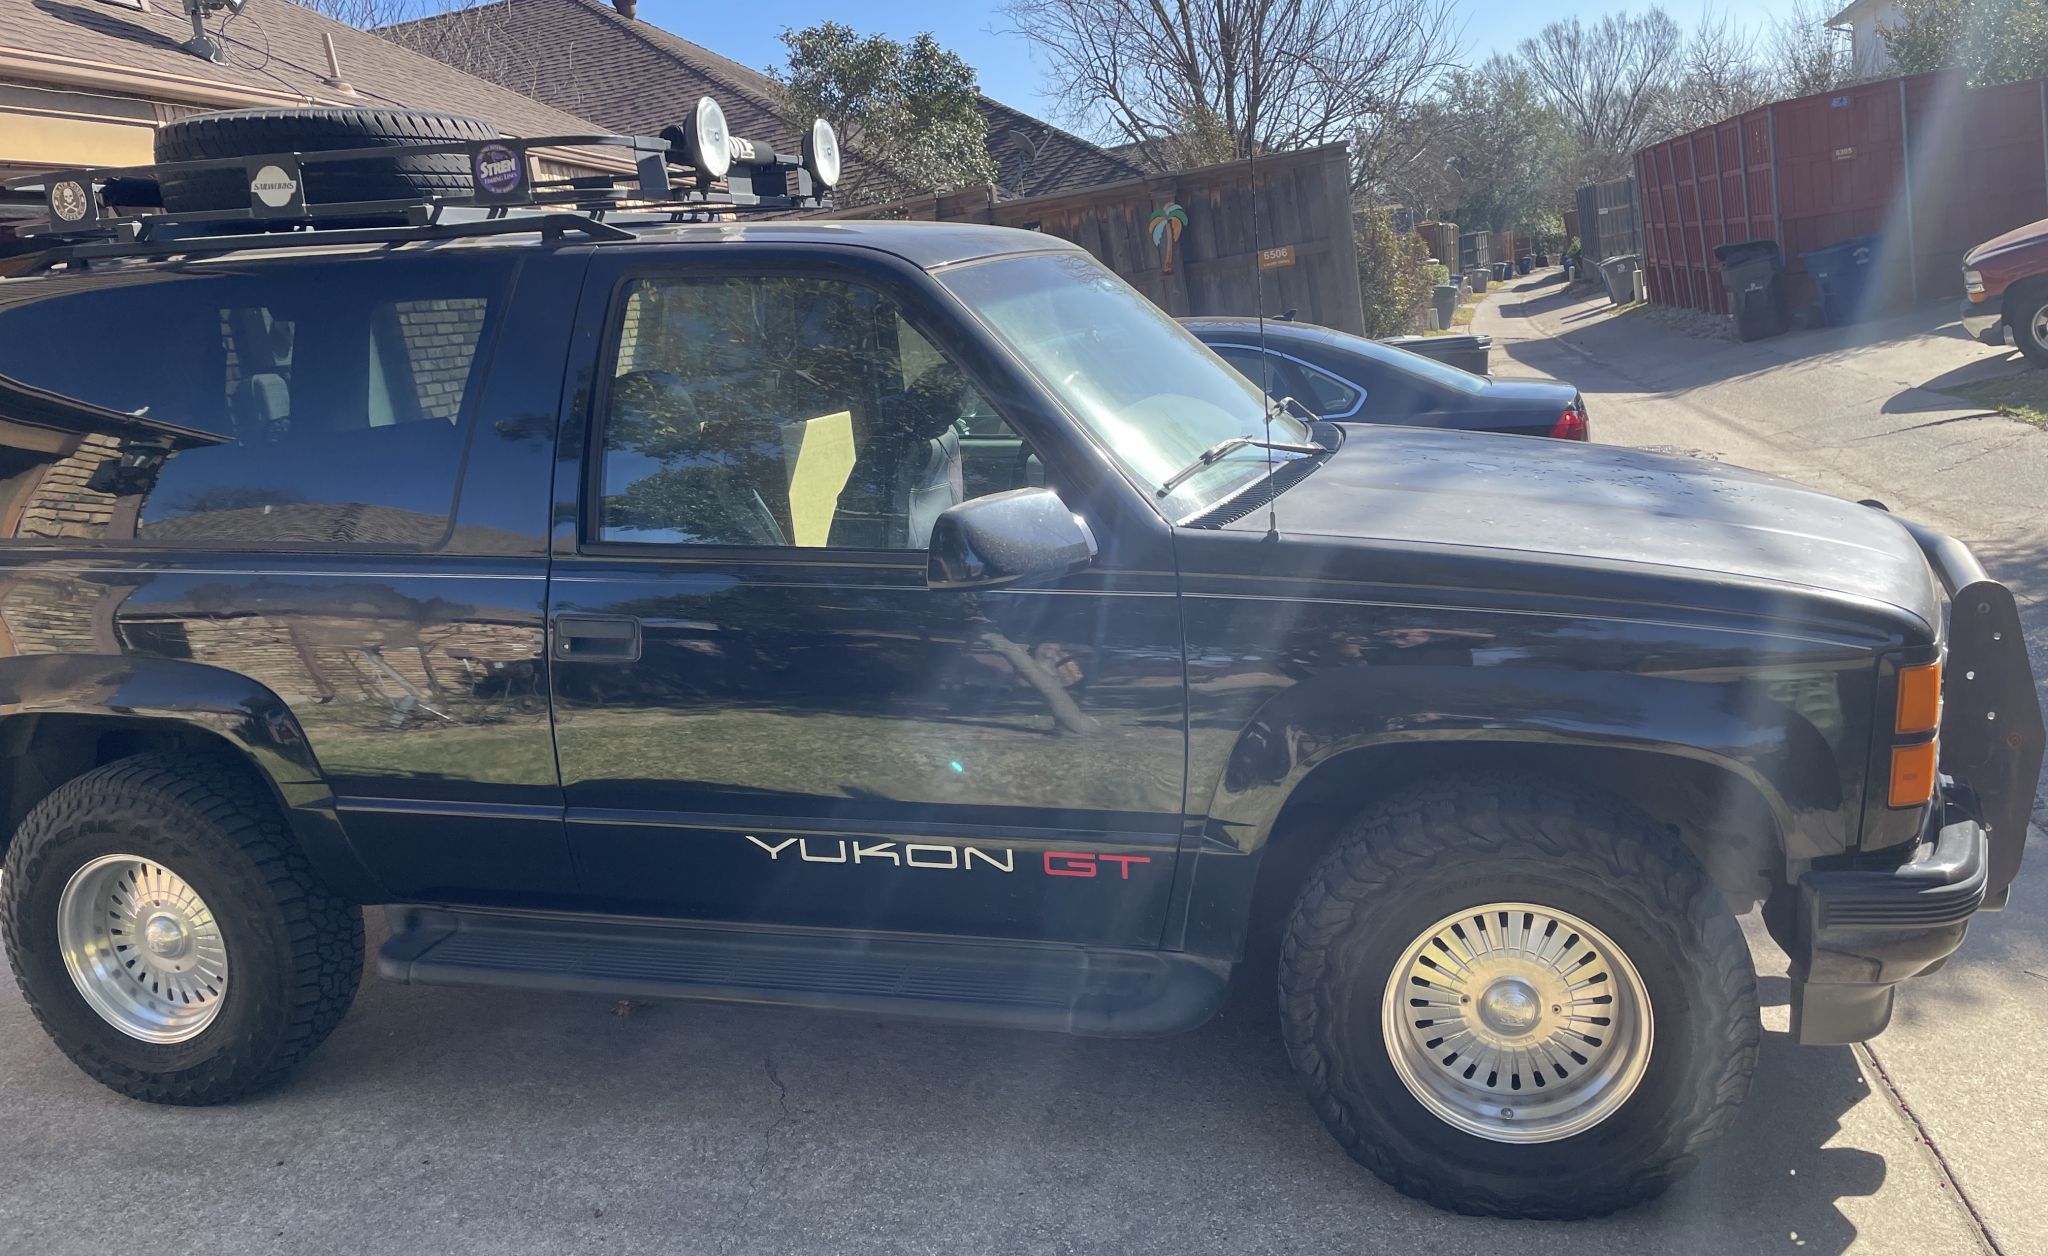 Tim Duncan's first car now up for sale on Craigslist